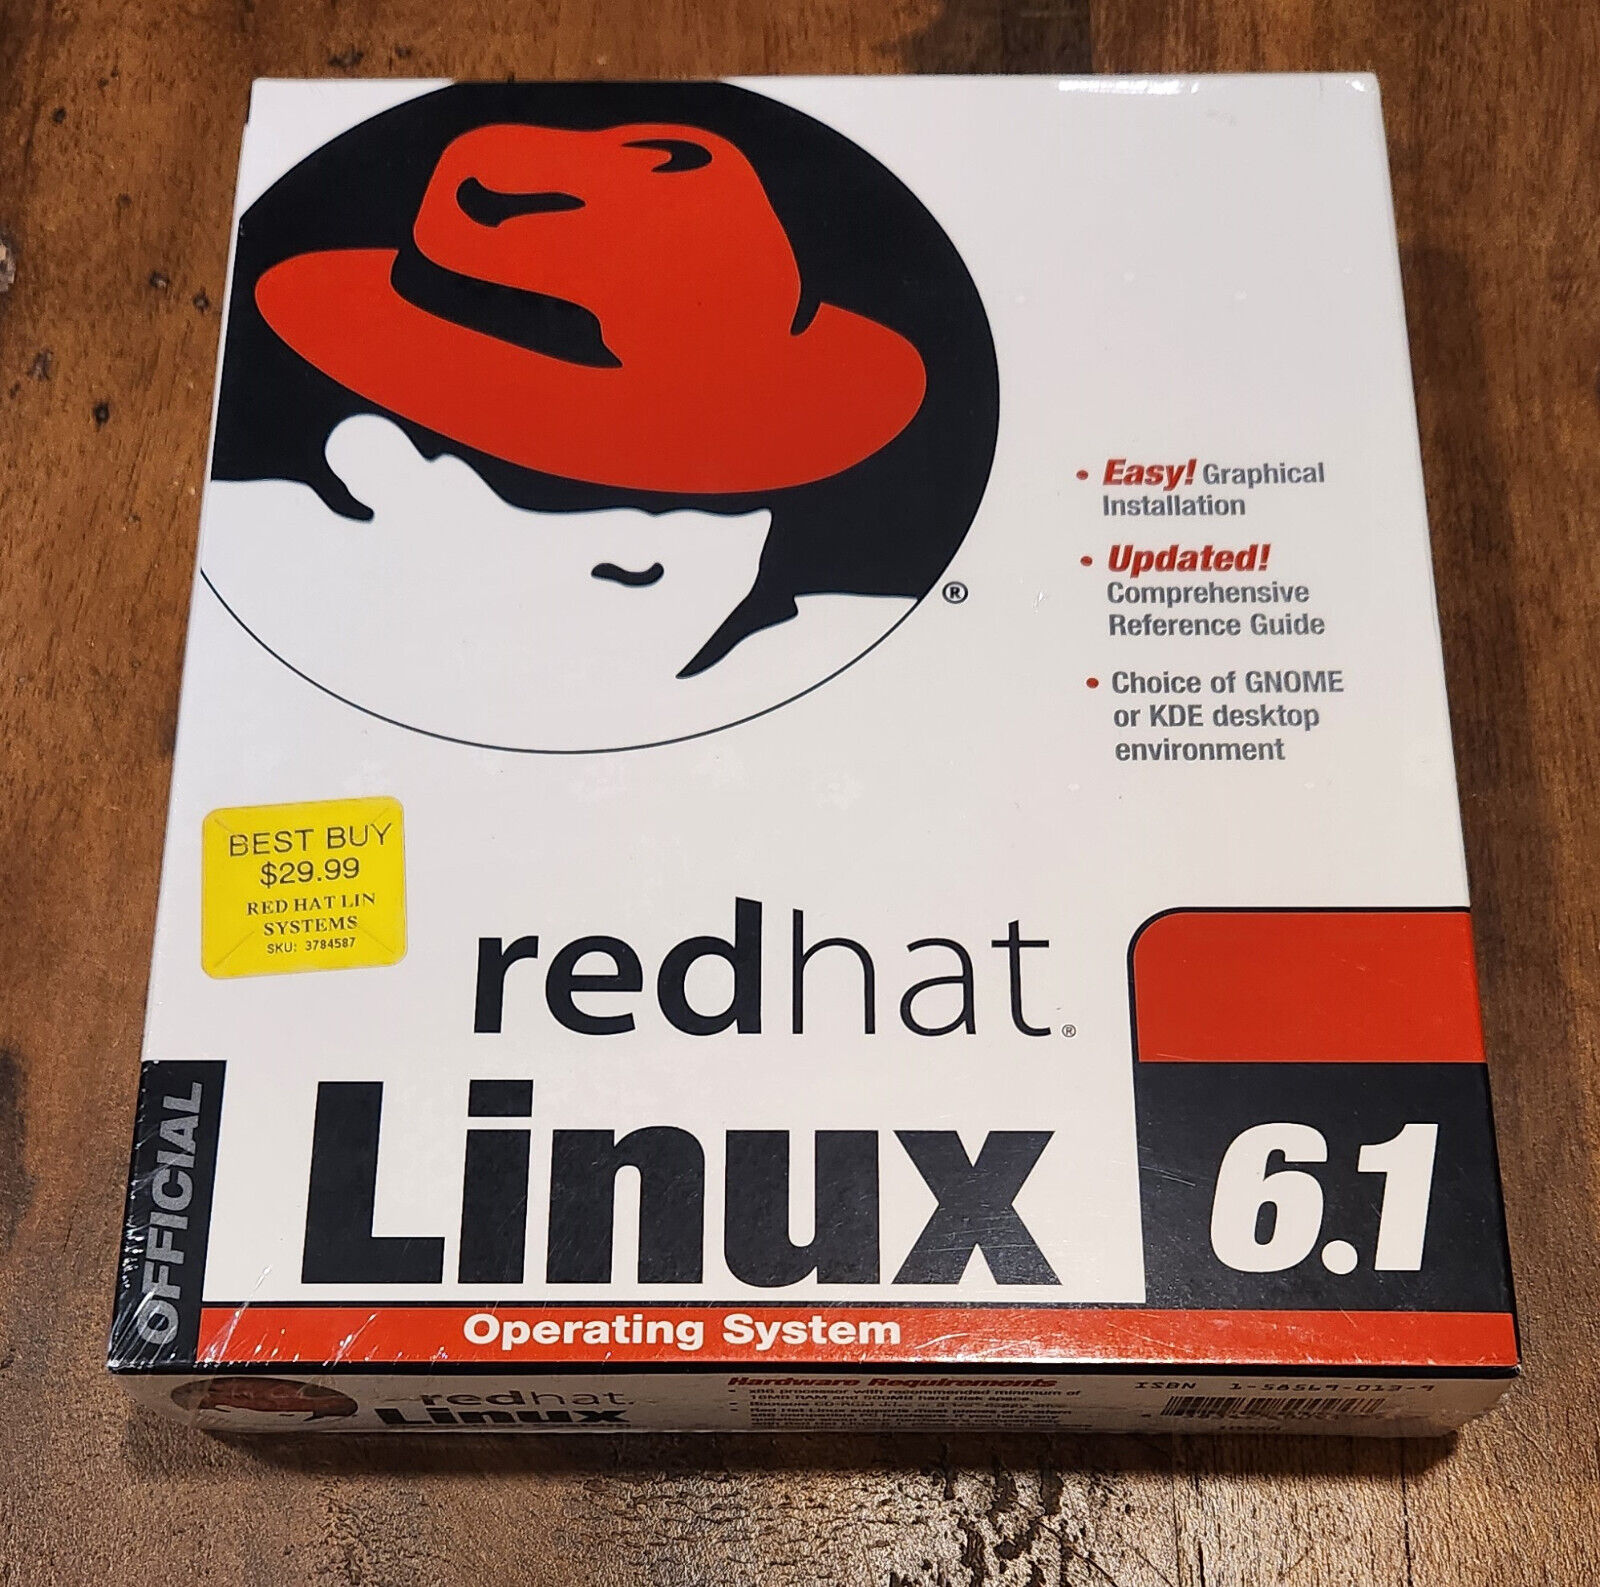 Redhat Linux 6.1 Operating System Standard Boxed Set - NEW SEALED Collectable